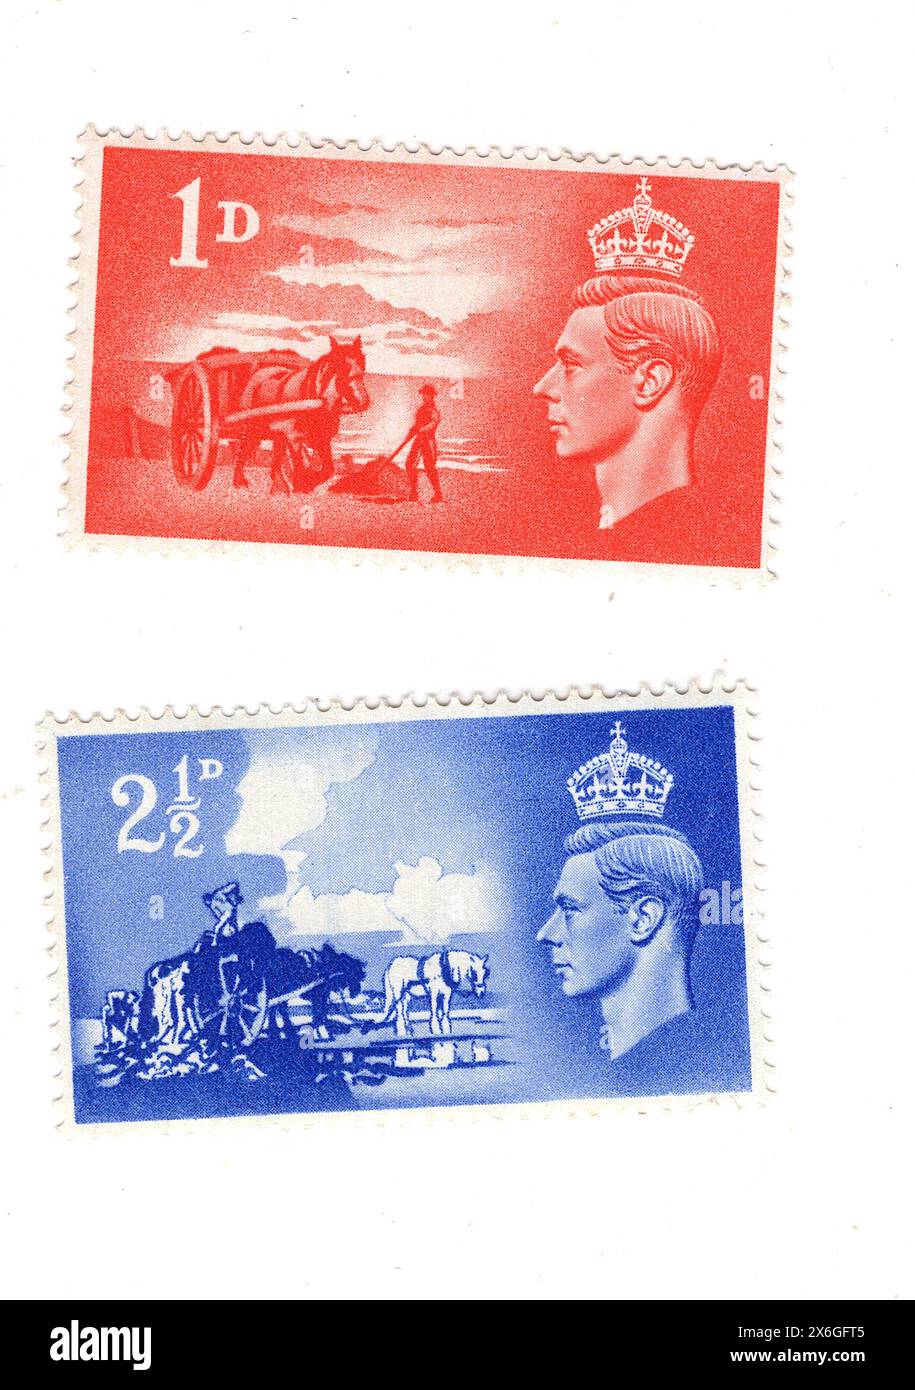 A set of King George VI postage stamps from Great Britain on a white background. Stock Photo